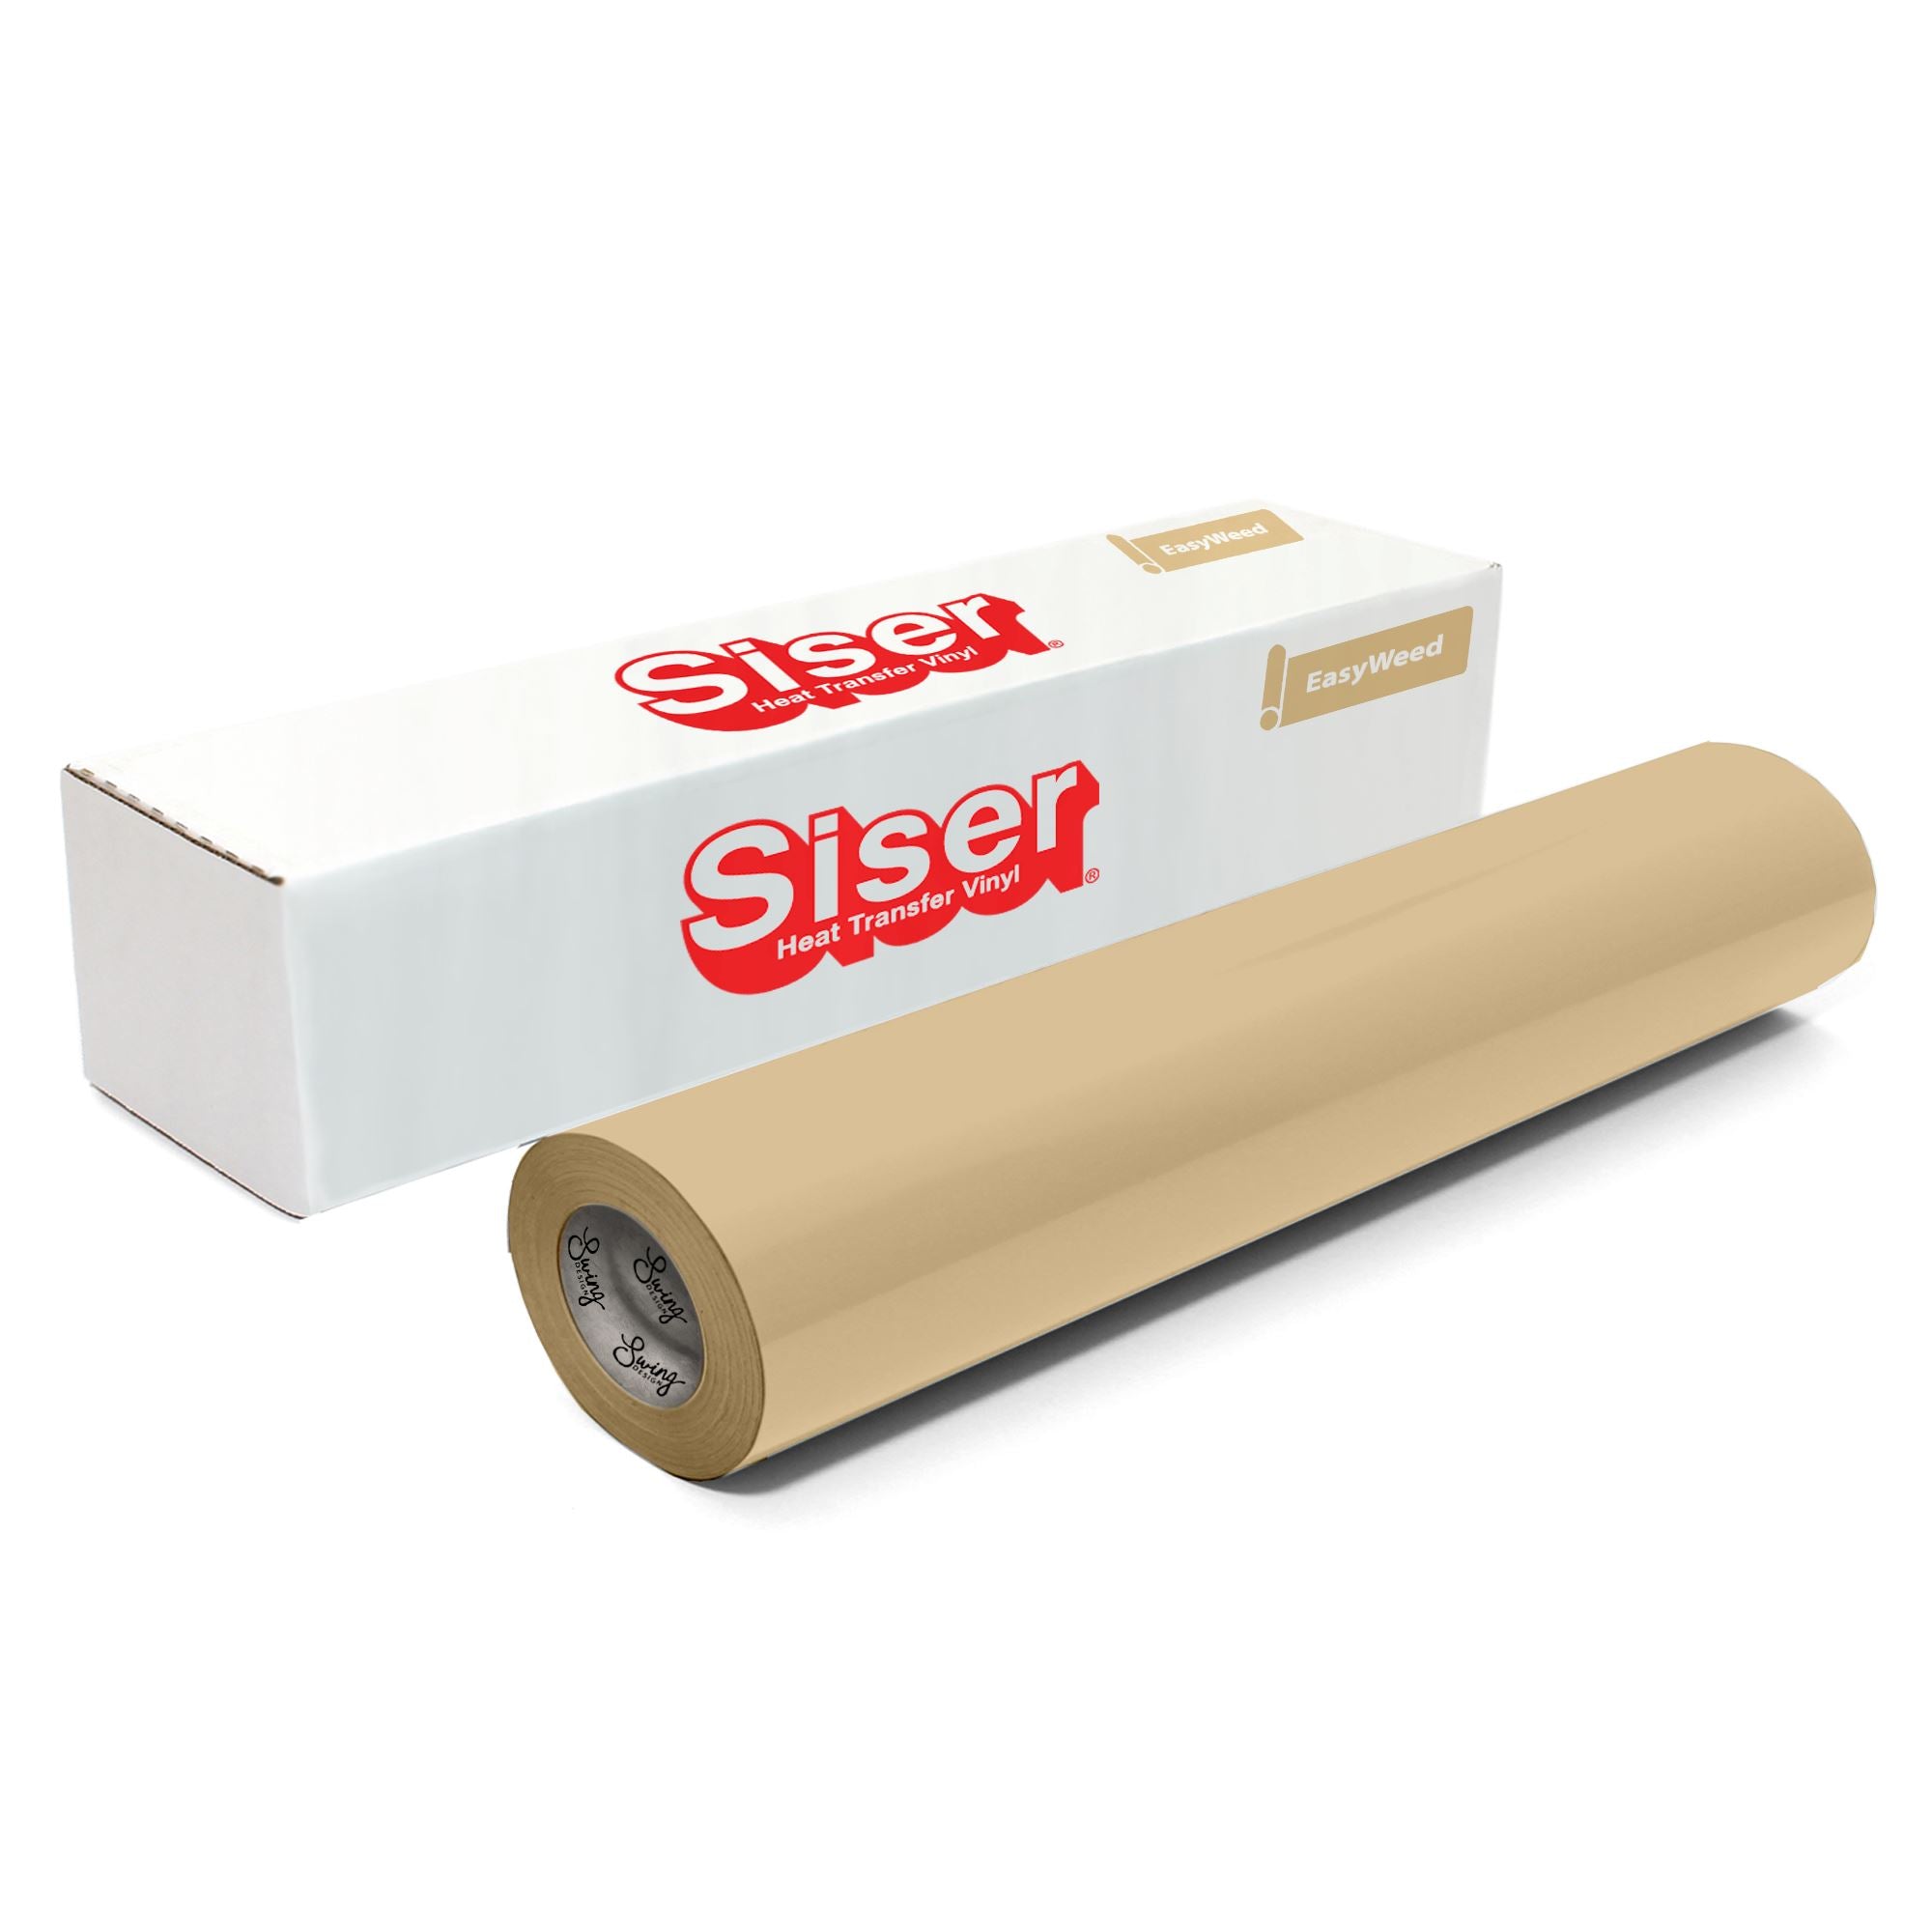 Siser EasyWeed Heat Transfer Vinyl 11.8 x 15ft Roll (White) - Compatible  with Siser Romeo/Juliet & Other Professional or Craft Cutters - Layerable 